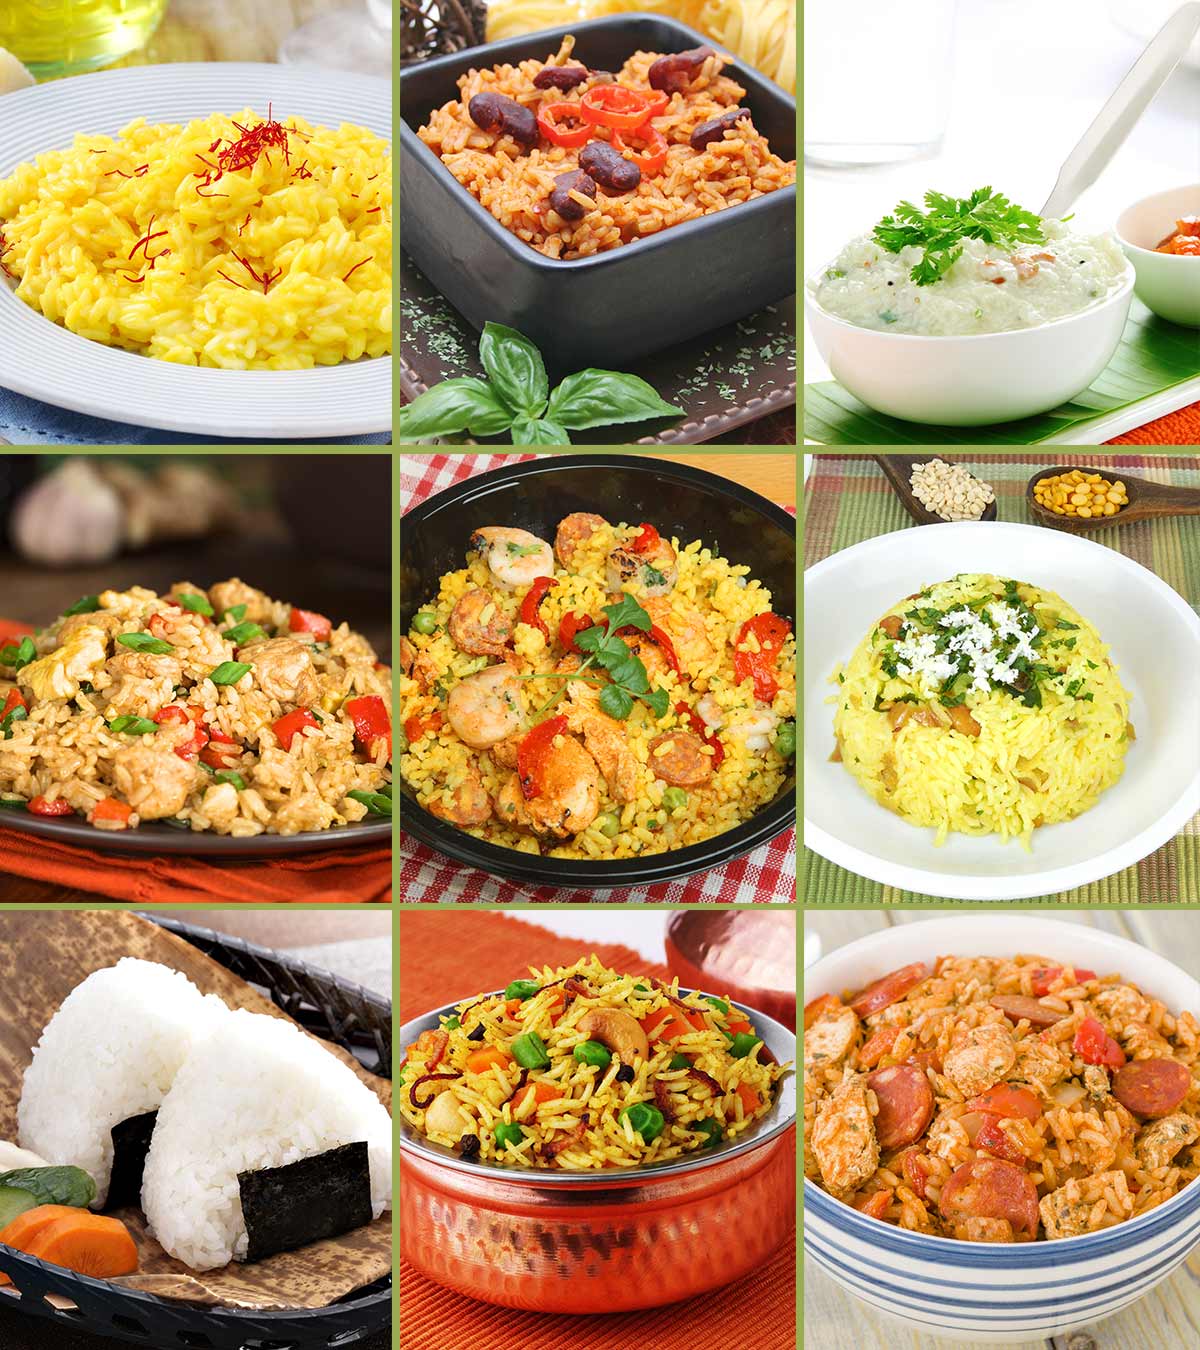 Top 10 Easy And Healthy Rice Recipes For Kids